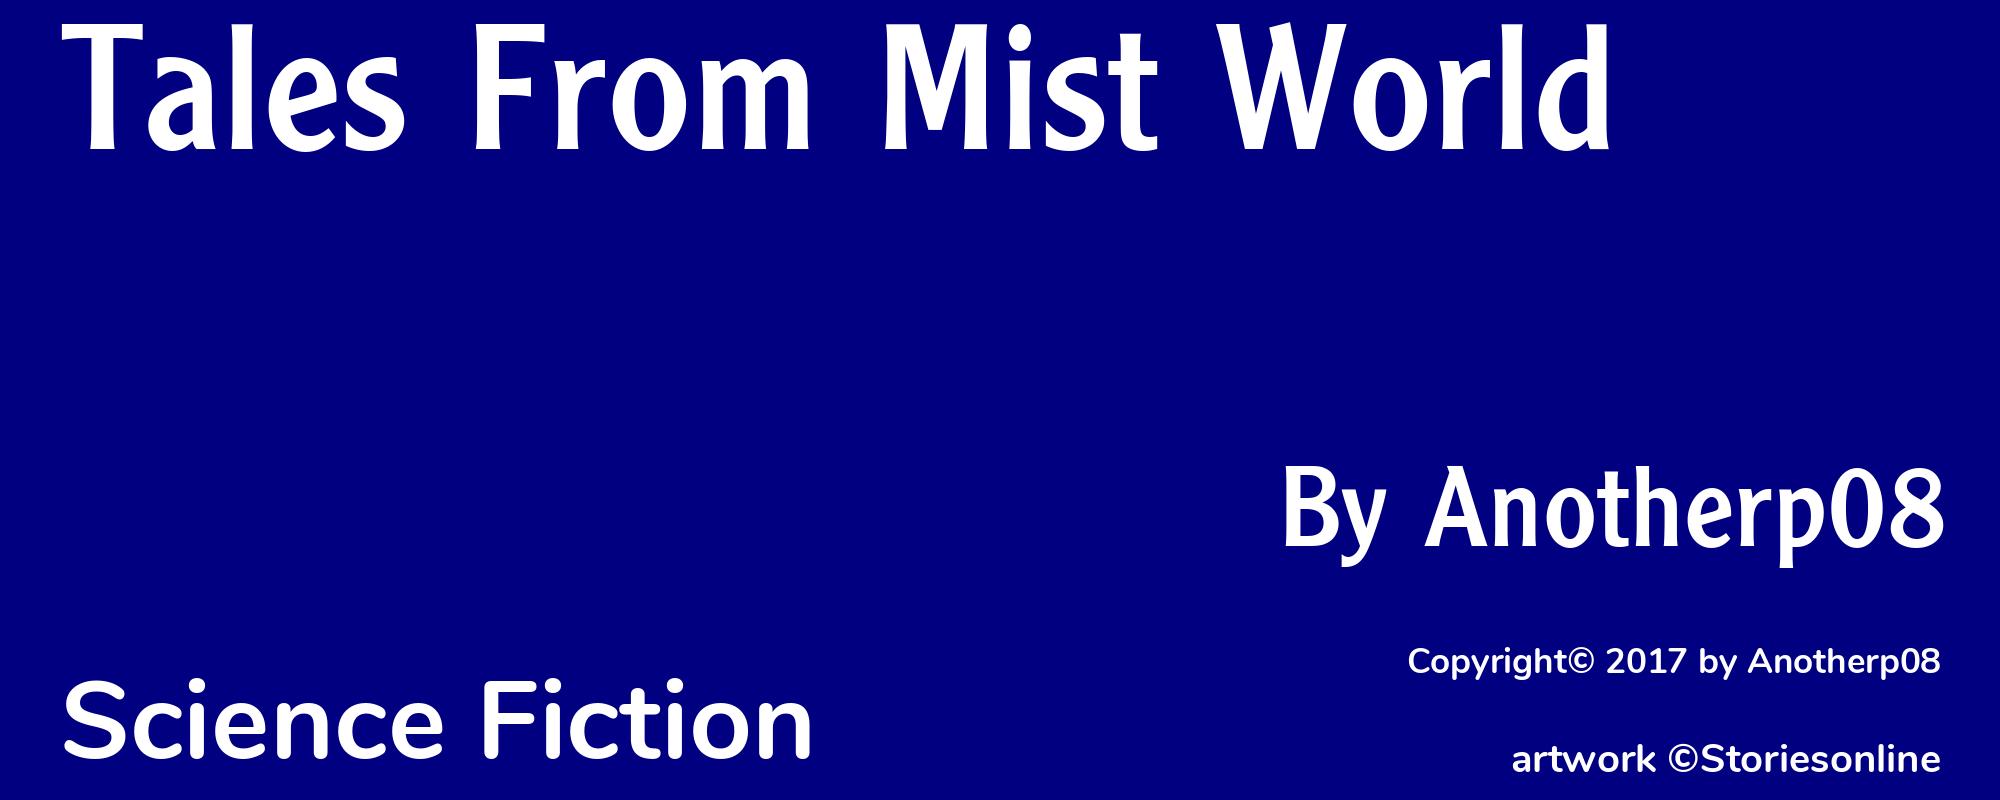 Tales From Mist World - Cover